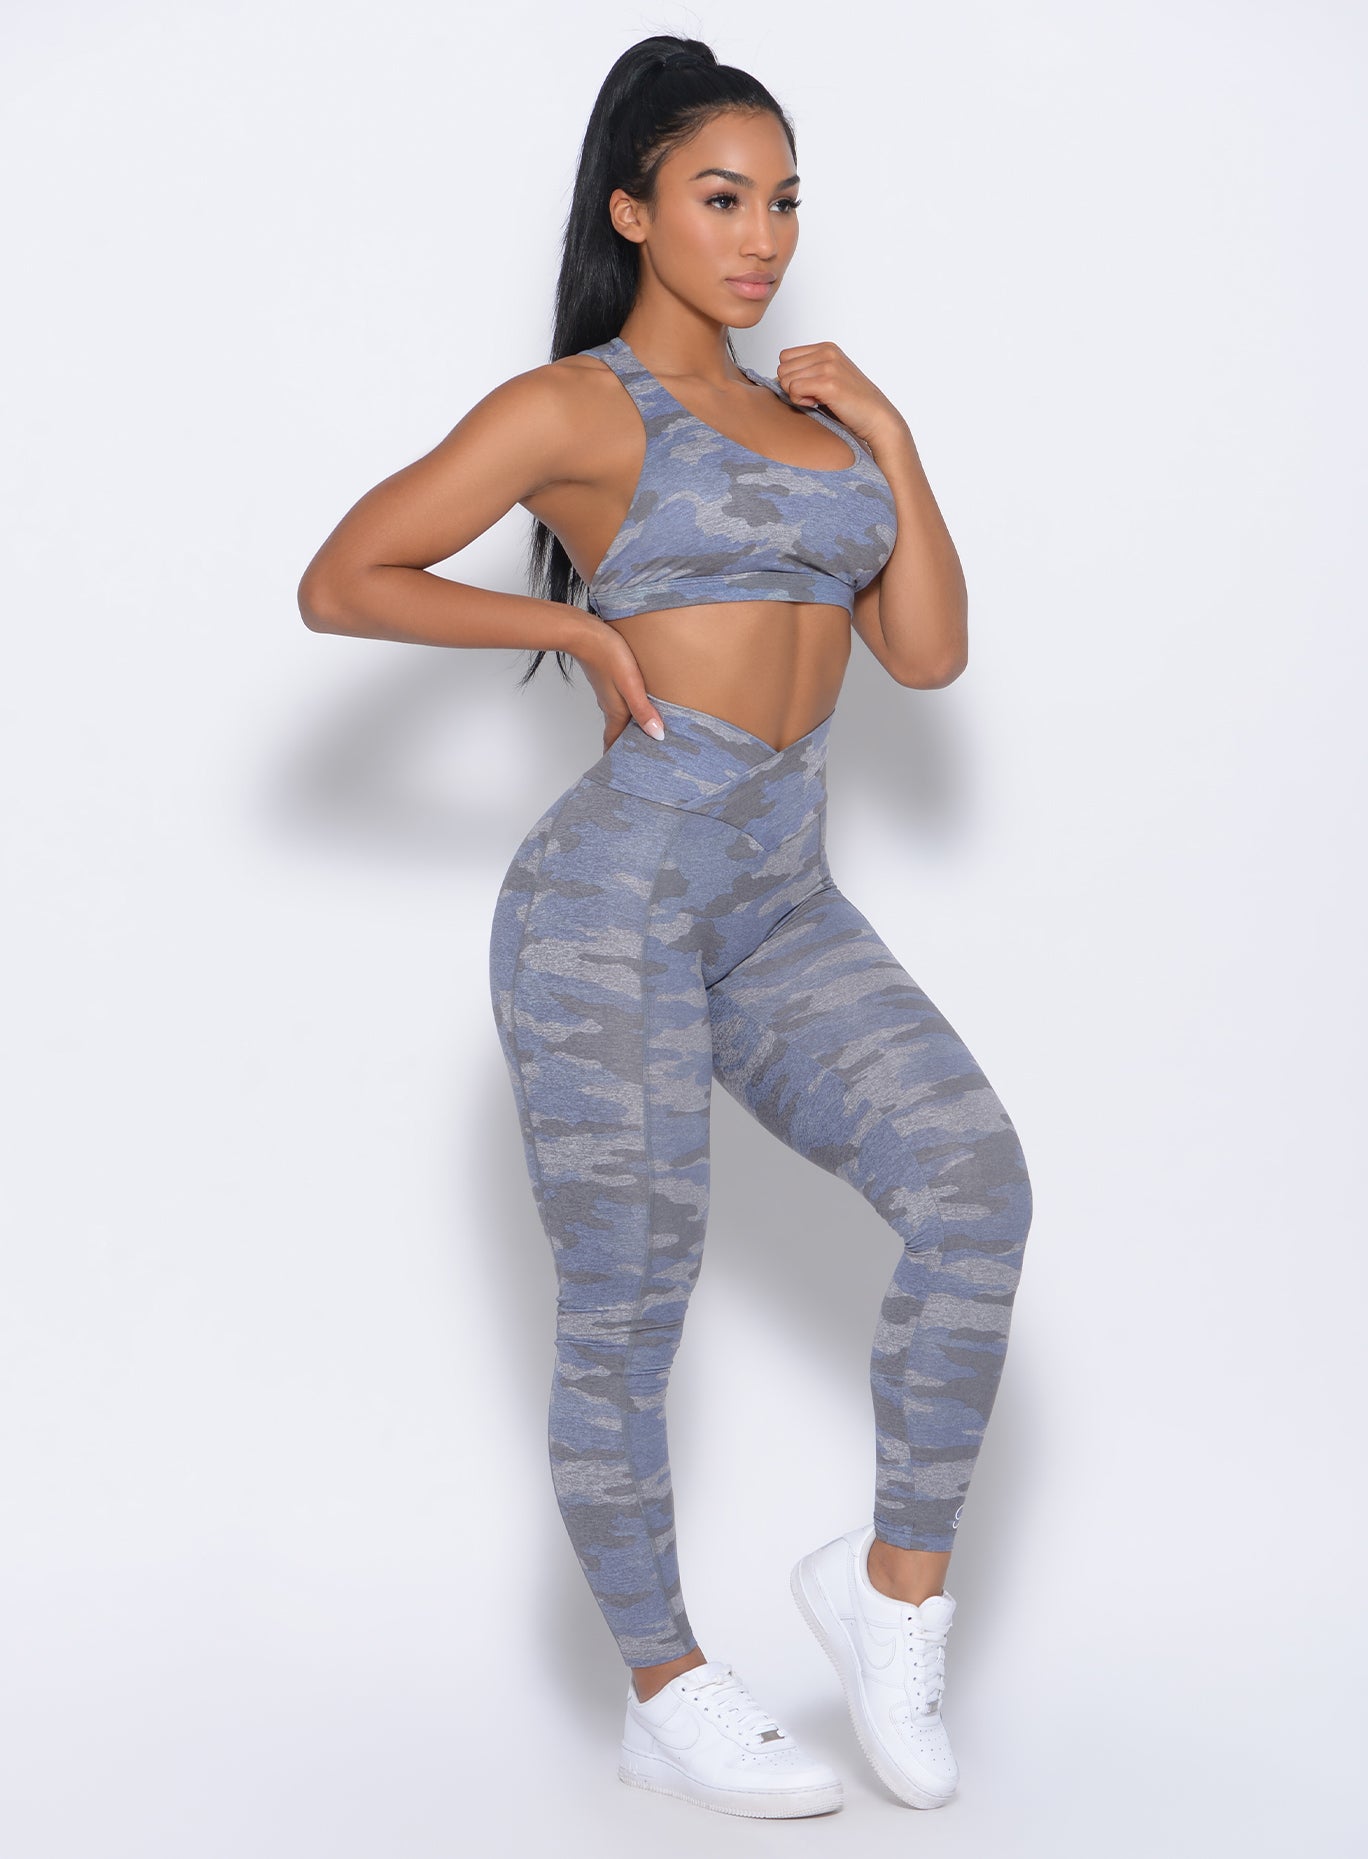 Right side view of the model wearing our brazilian contour leggings in silver camo and a matching bra 